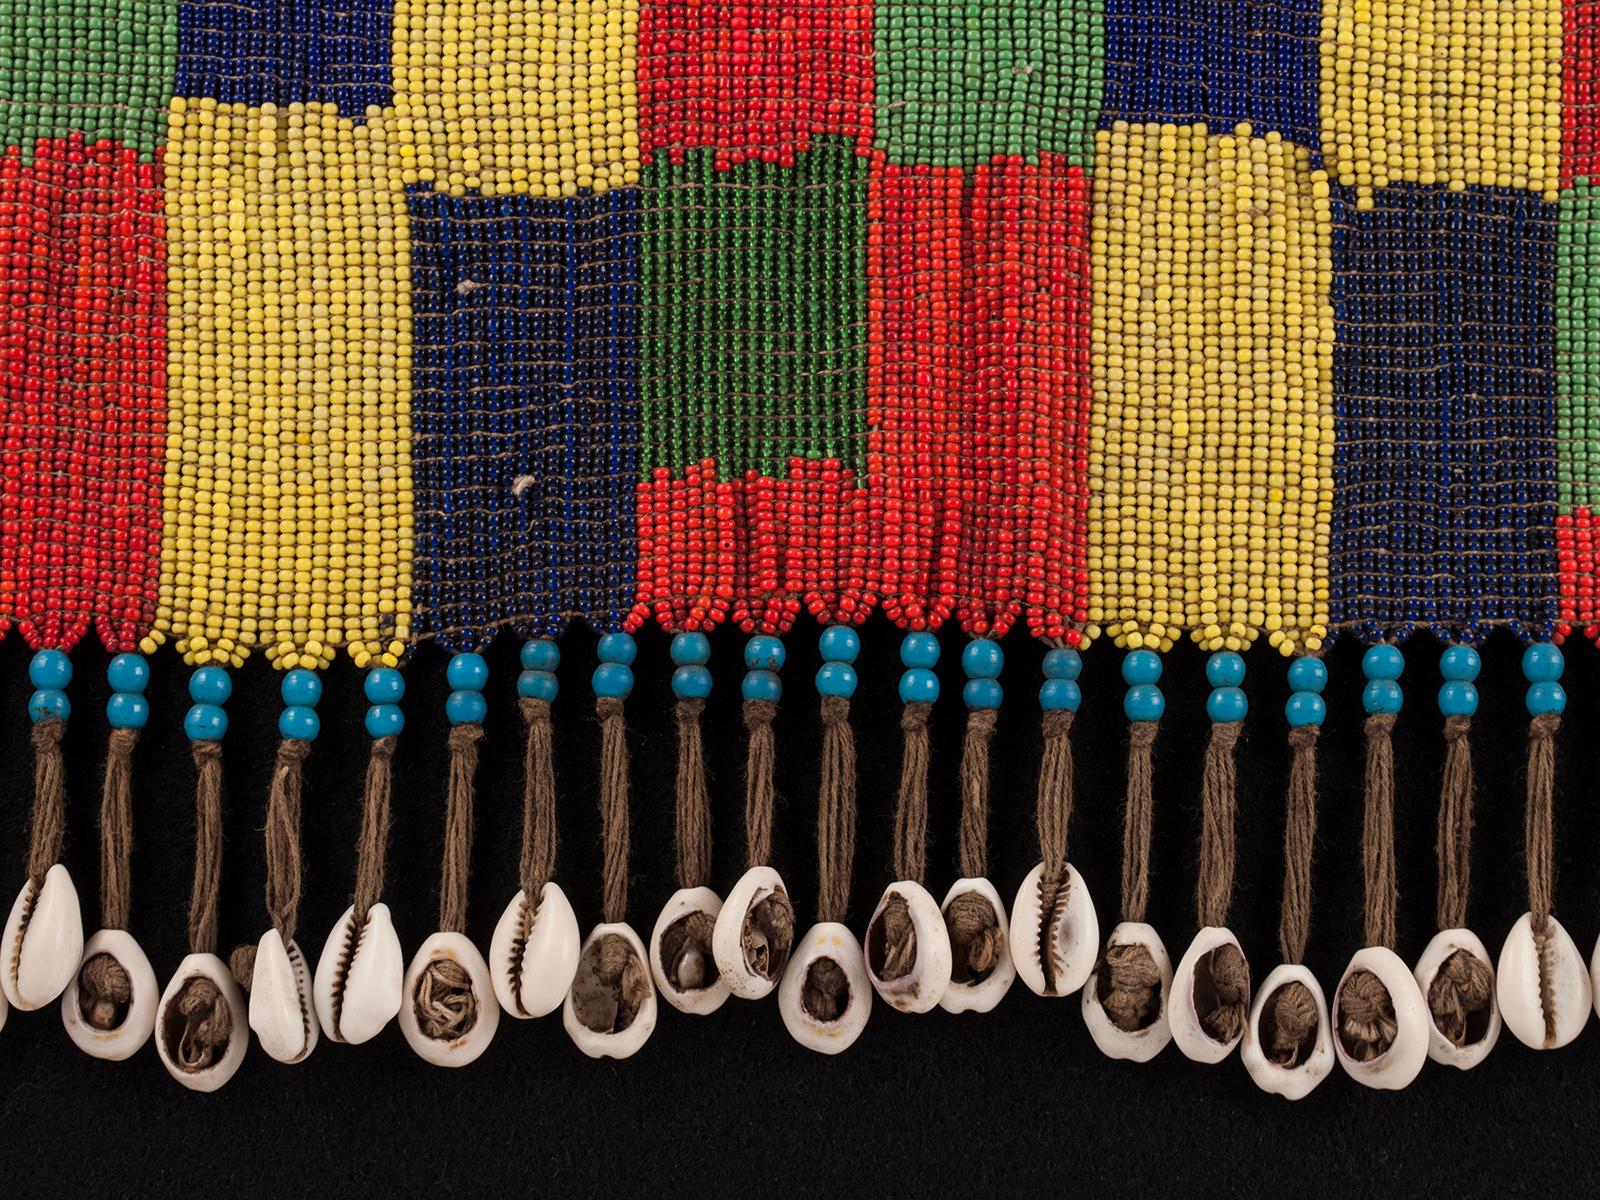 Mid-20th century cache-fesse, Negbe, Mangbetu, D.R. Congo

Early to Mid-20th century Tribal Pikuran (cache-sexe), Bana Guili people, Mandara Mountains, Cameroon

A large graphic cache-sexe made of blue, red, green and yellow trade beads mounted